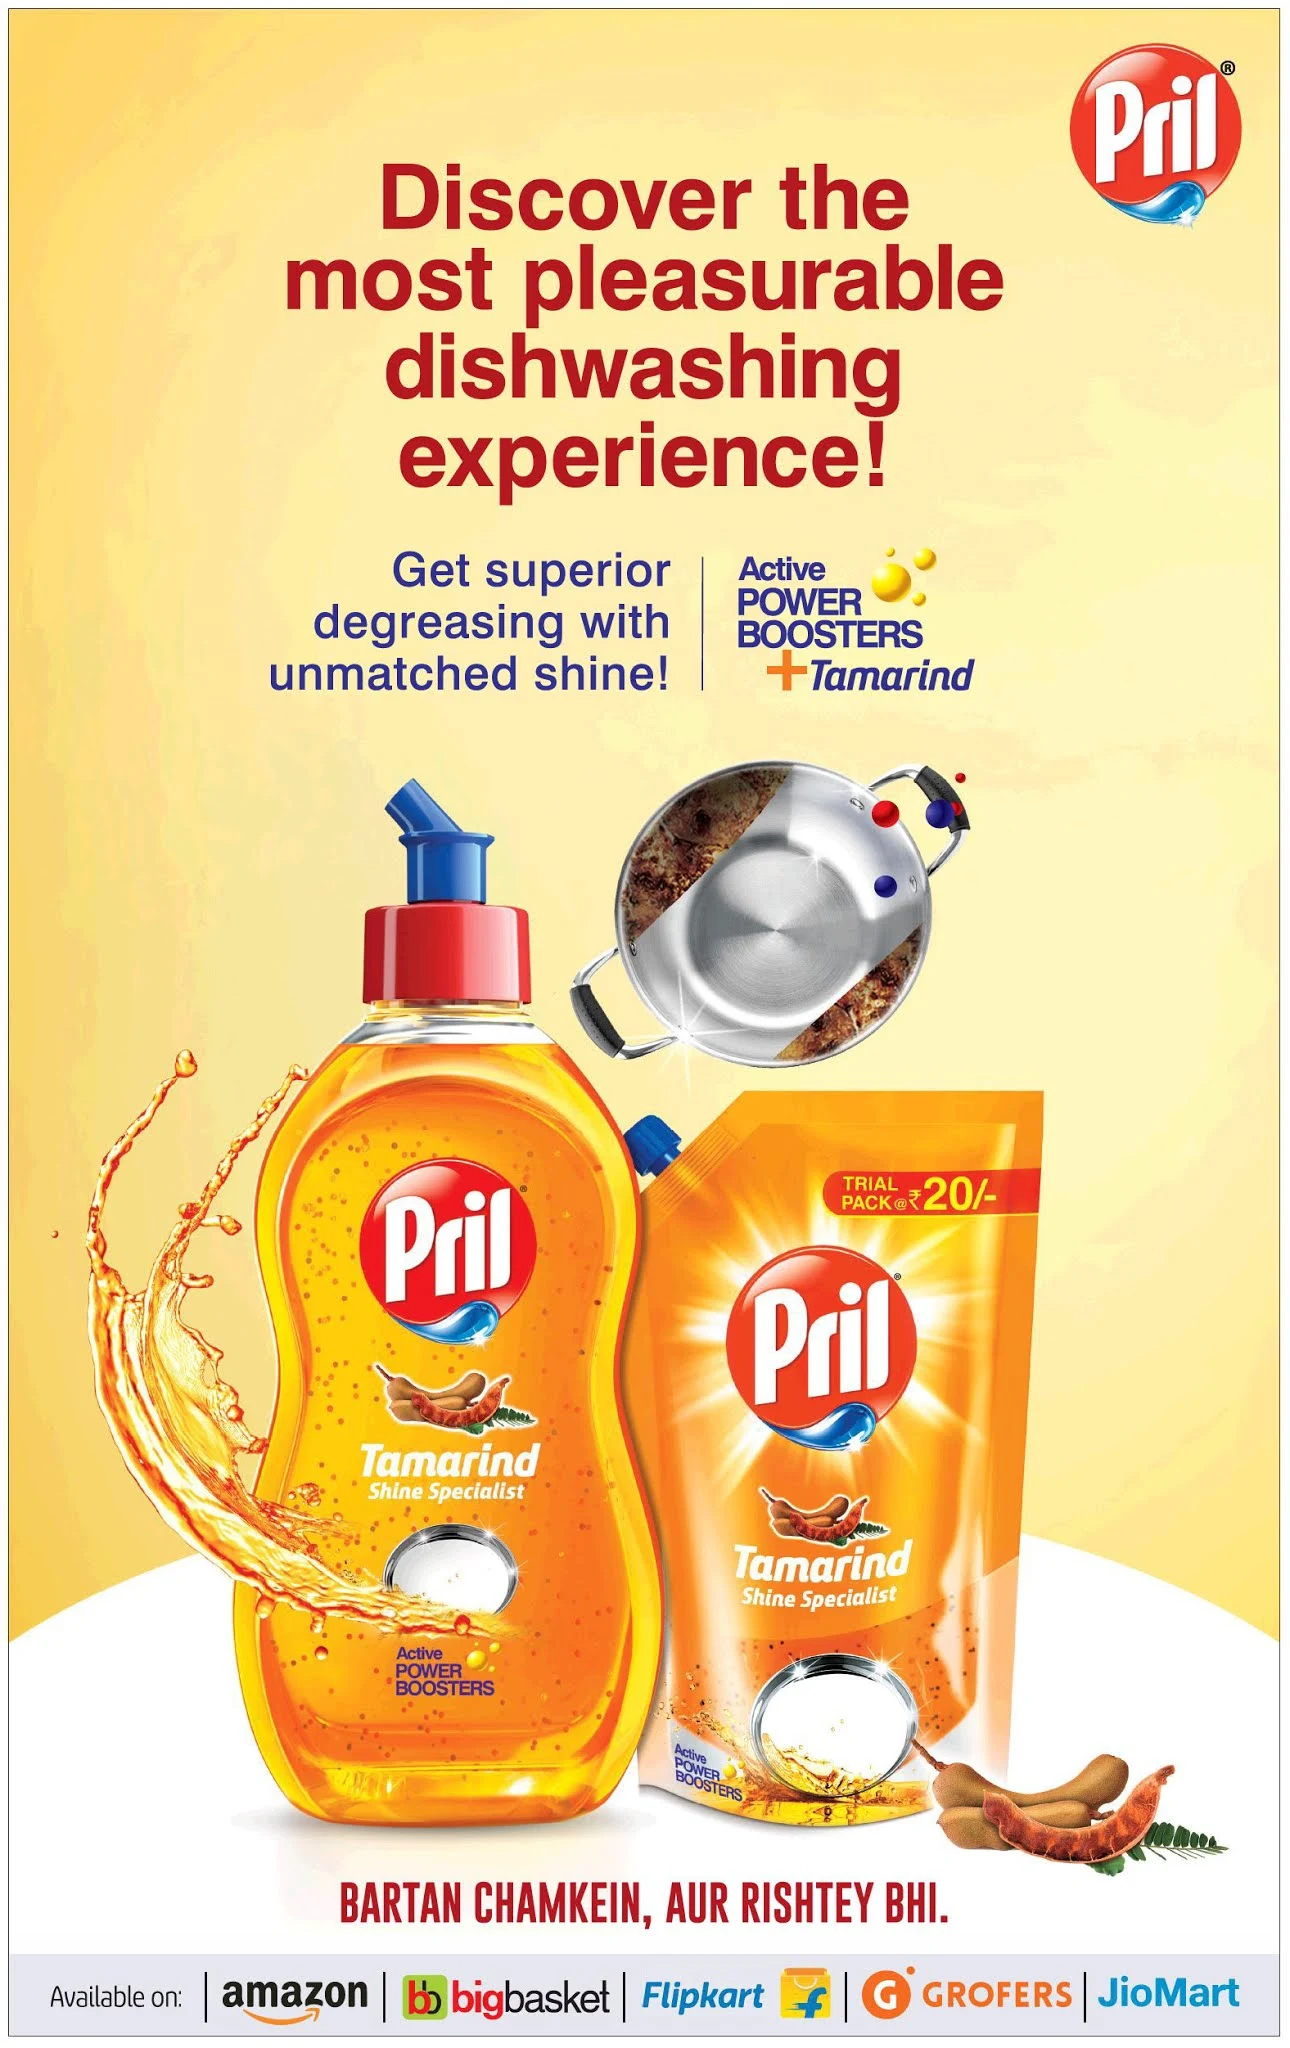 #5 Prill Discover the most pleasurable dishwashing experience